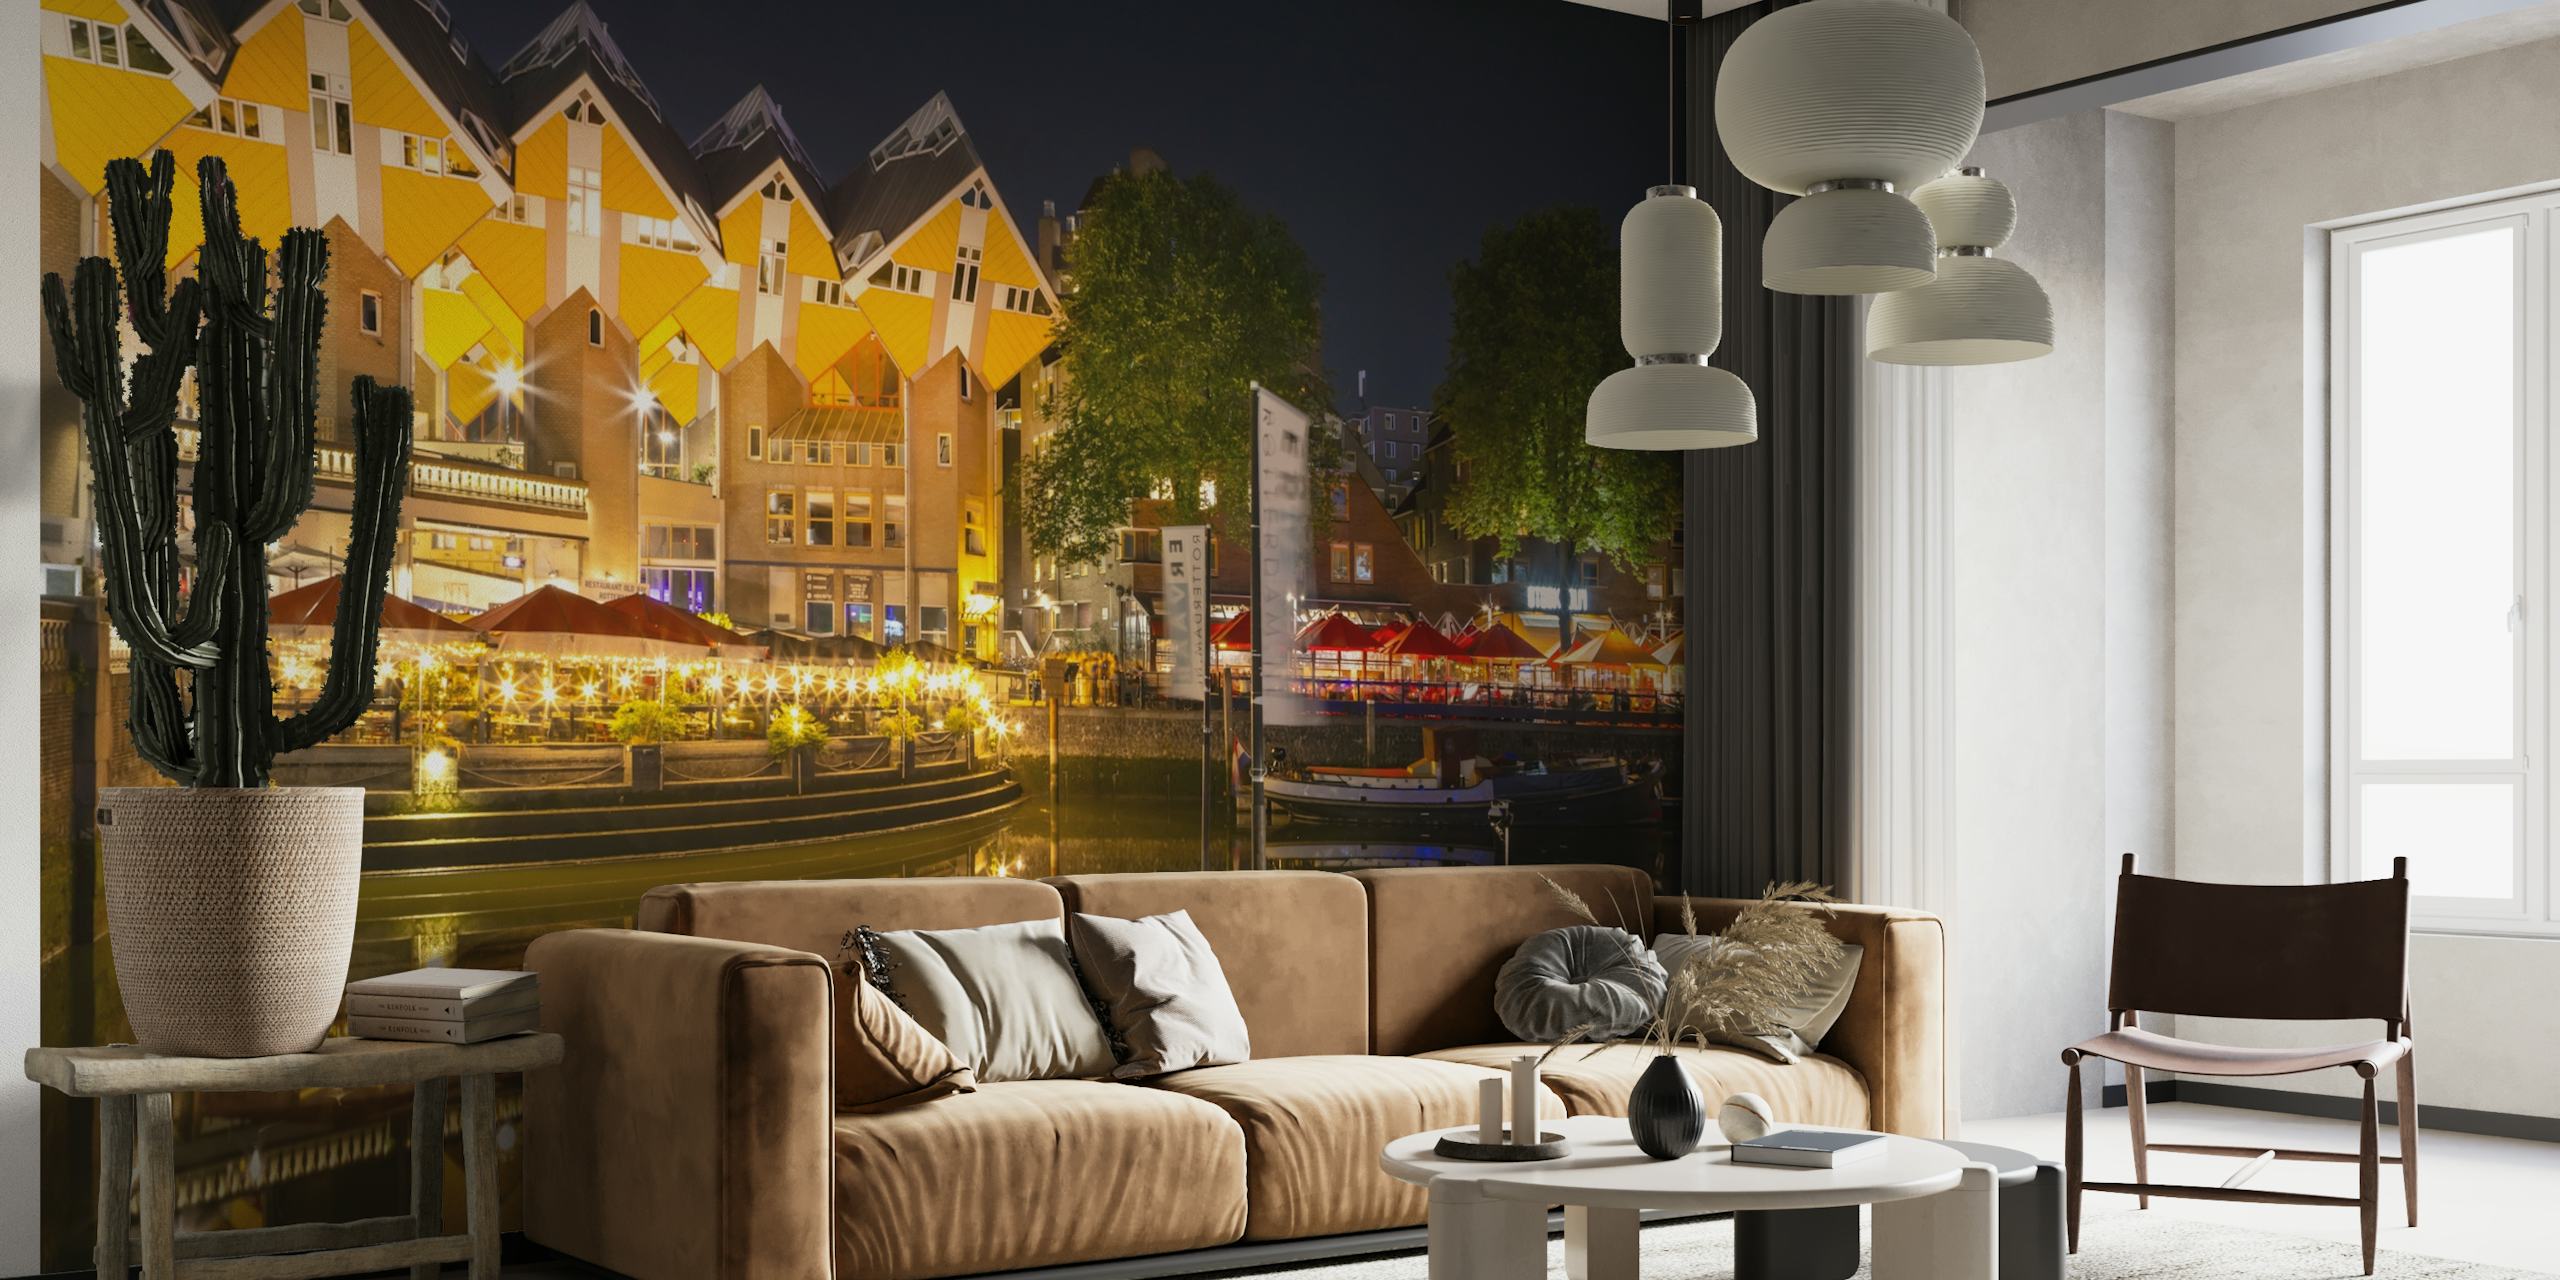 ROTTERDAM Oude Haven and Cube Houses by night papel pintado